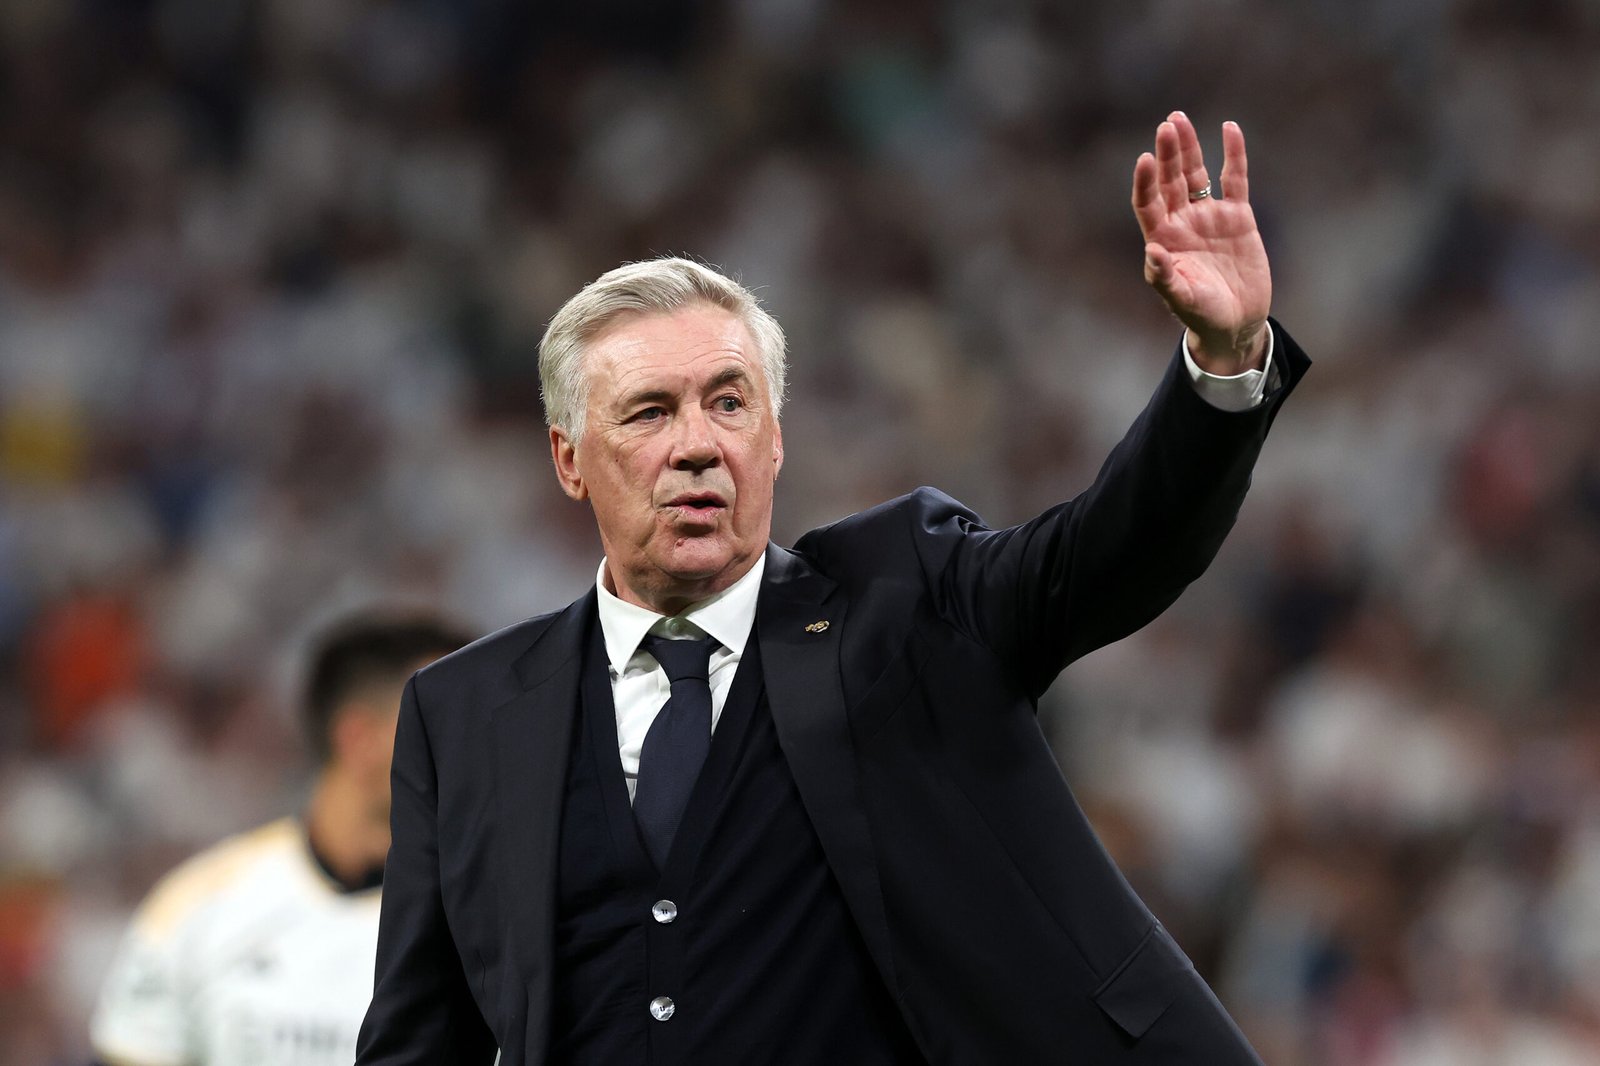 MADRID, SPAIN - MAY 08: Carlo Ancelotti, Head Coach of Real Madrid, celebrates after the team's victory during the UEFA Champions League semi-final second leg match between Real Madrid and FC Bayern München at Estadio Santiago Bernabeu on May 08, 2024 in Madrid, Spain. (Photo by Alexander Hassenstein/Getty Images)